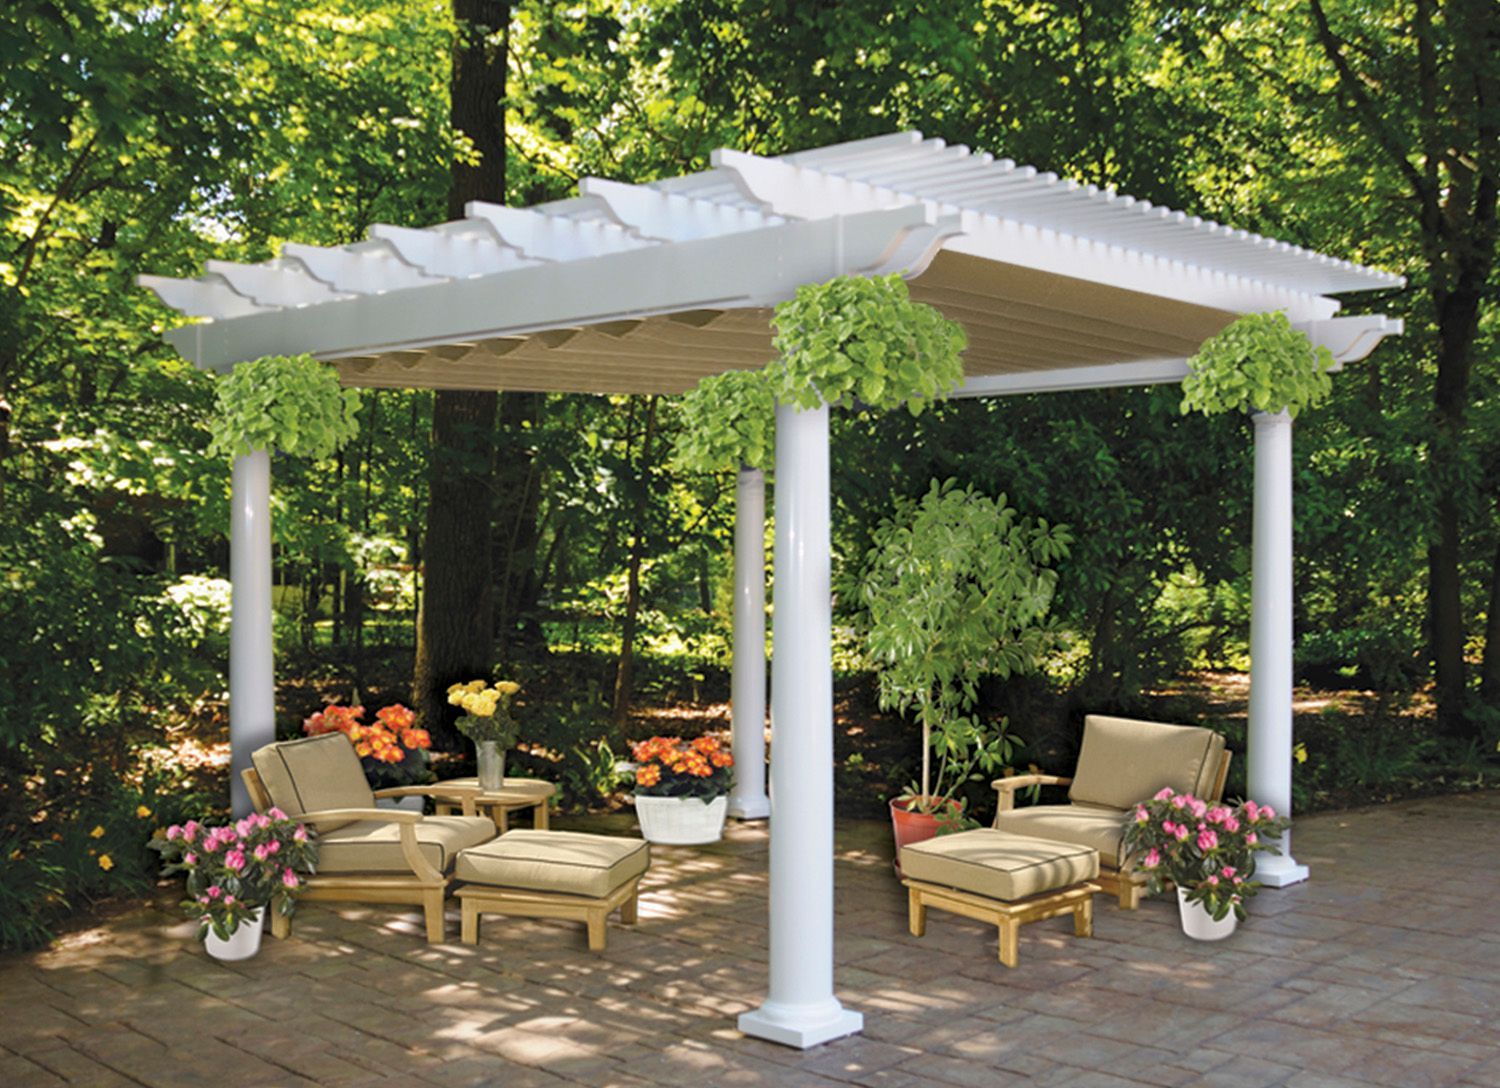 Photo of a Betterliving Canopy by Betterliving Patio and Sunrooms of Pittsburgh